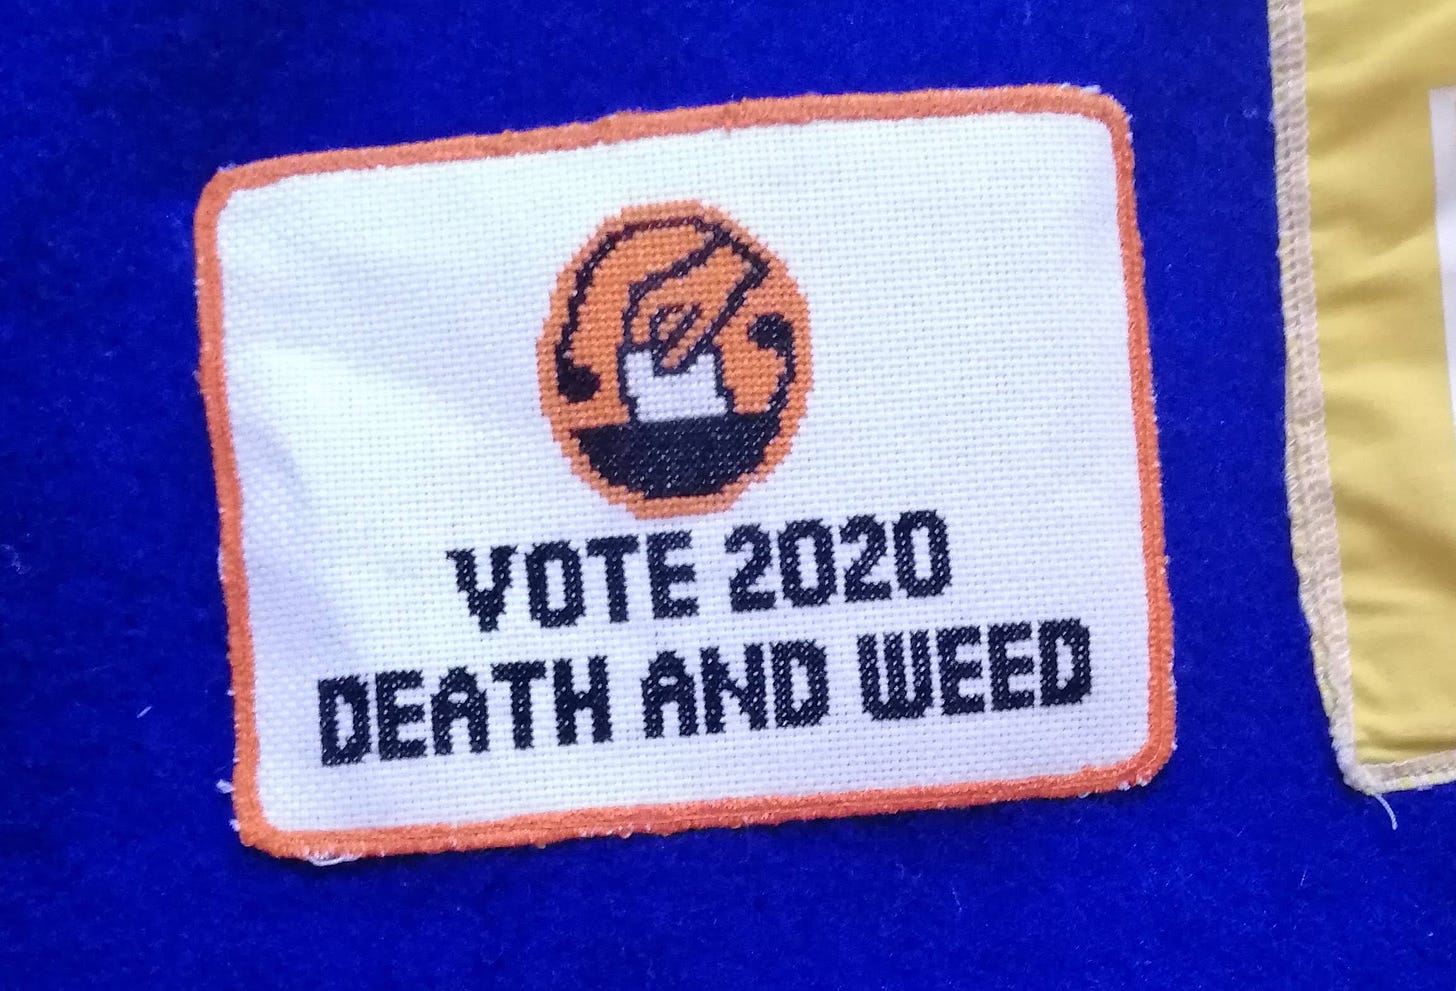 Cross stitch with the Election NZ logo and the text "Vote 2020 Death and Weed" sewn onto a blue wool blanket